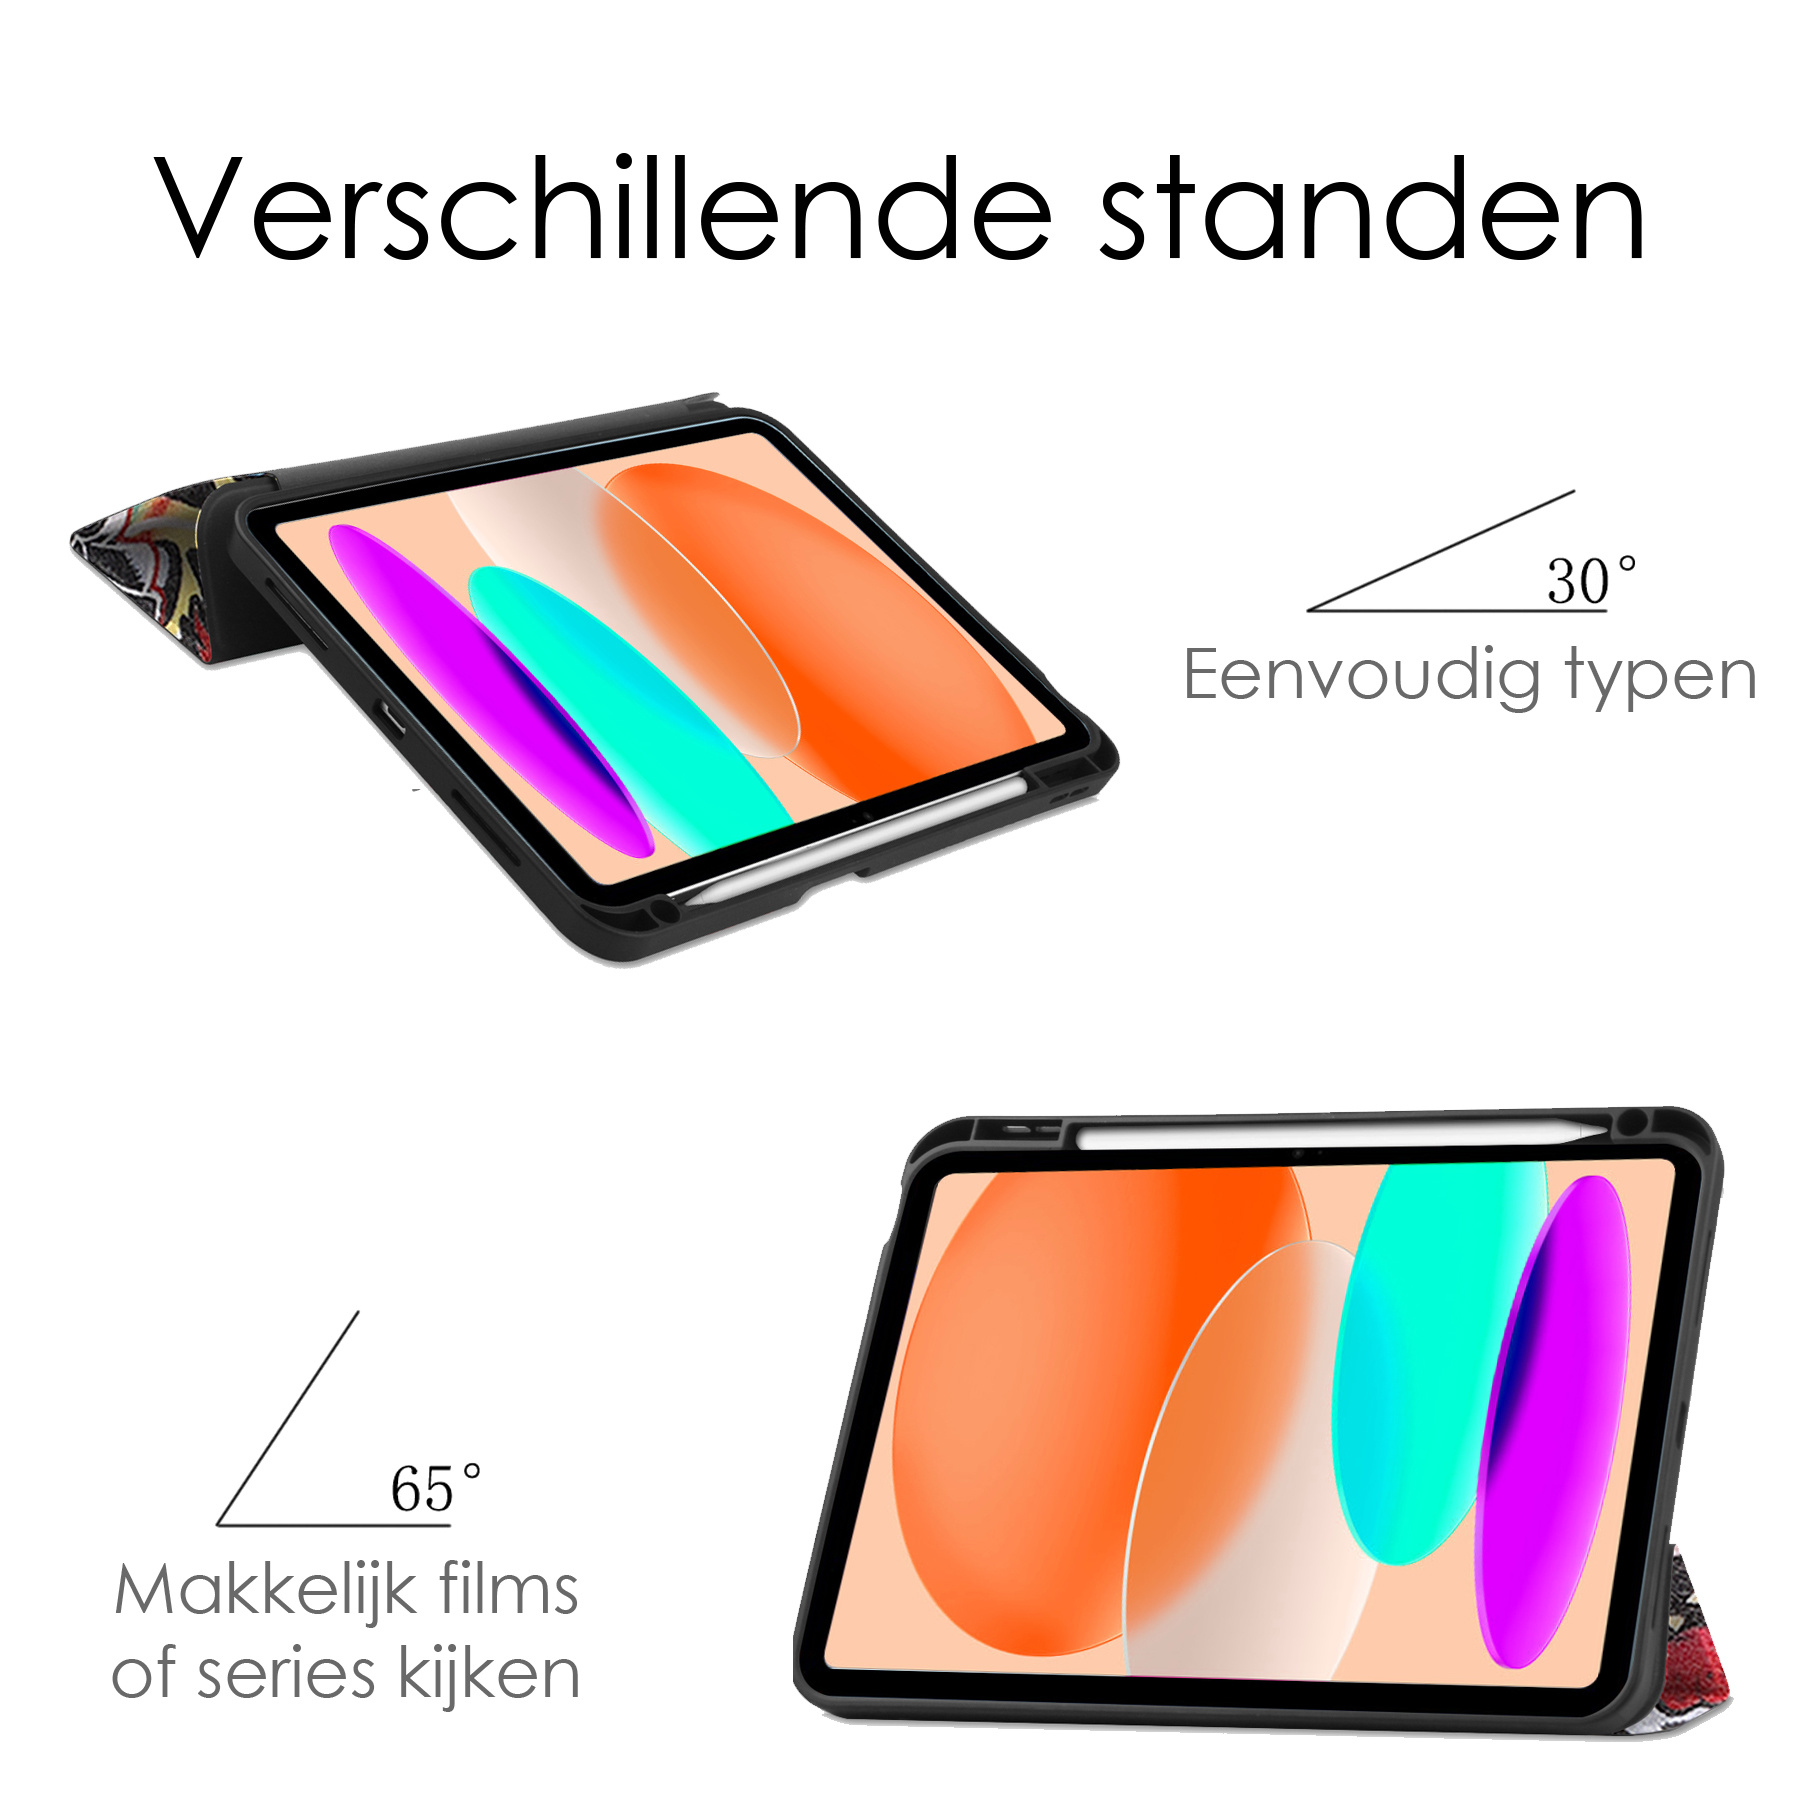 iPad 10 2022 Hoesje Hardcover Hoes Book Case Met Apple Pencil Uitsparing - Graffity